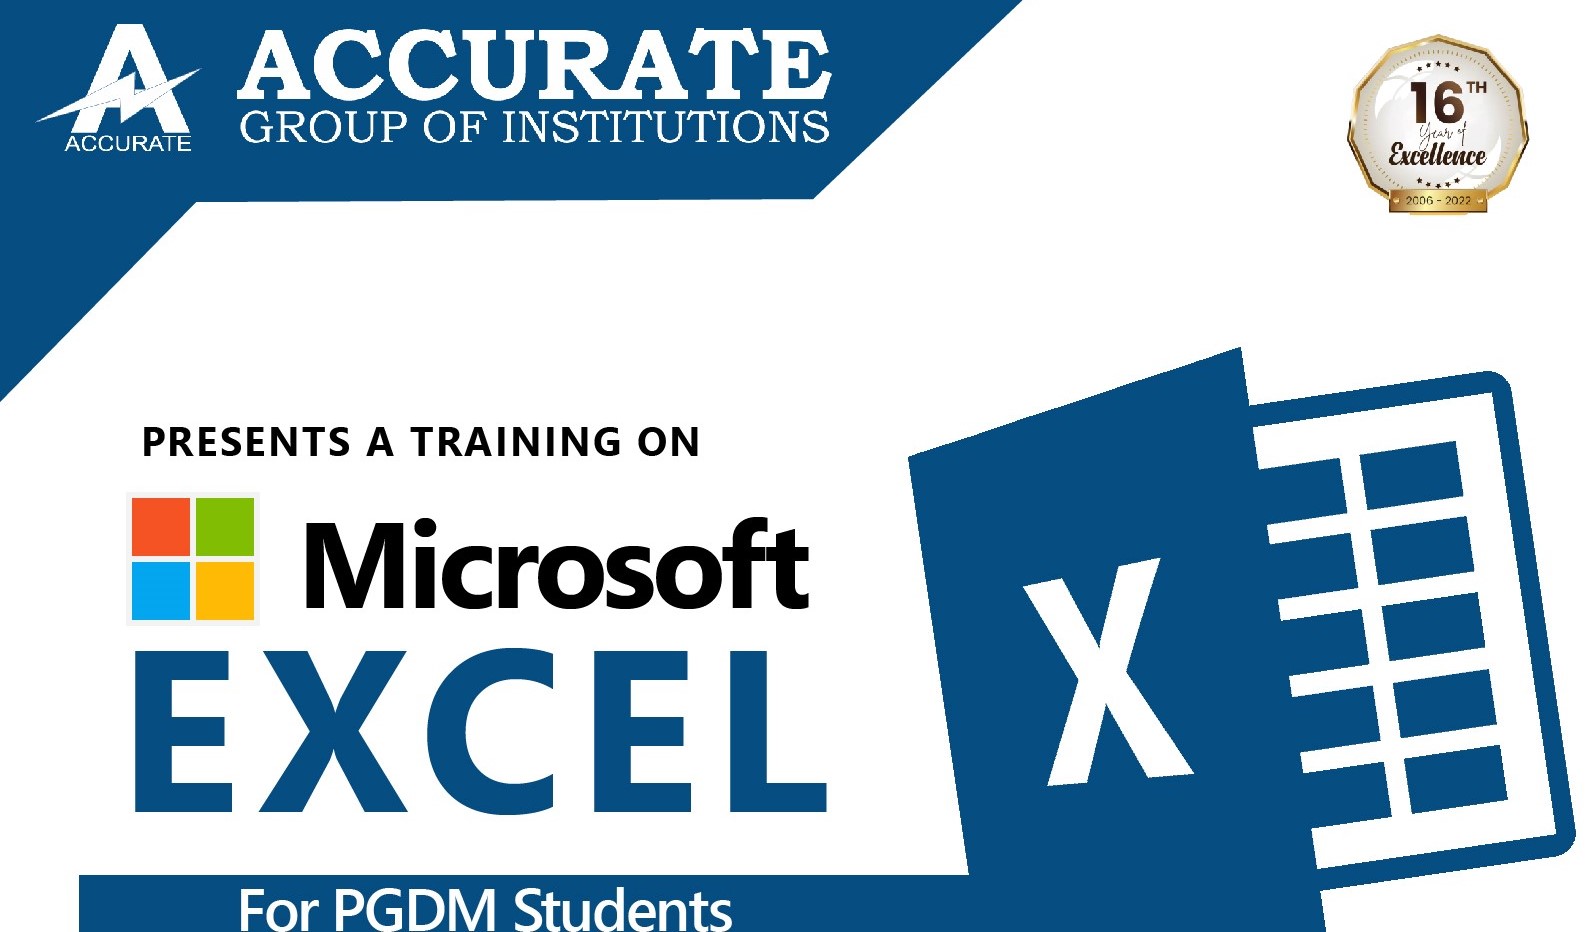 Microsoft Excel Training for PGDM Students at Accurate Group of Institutions